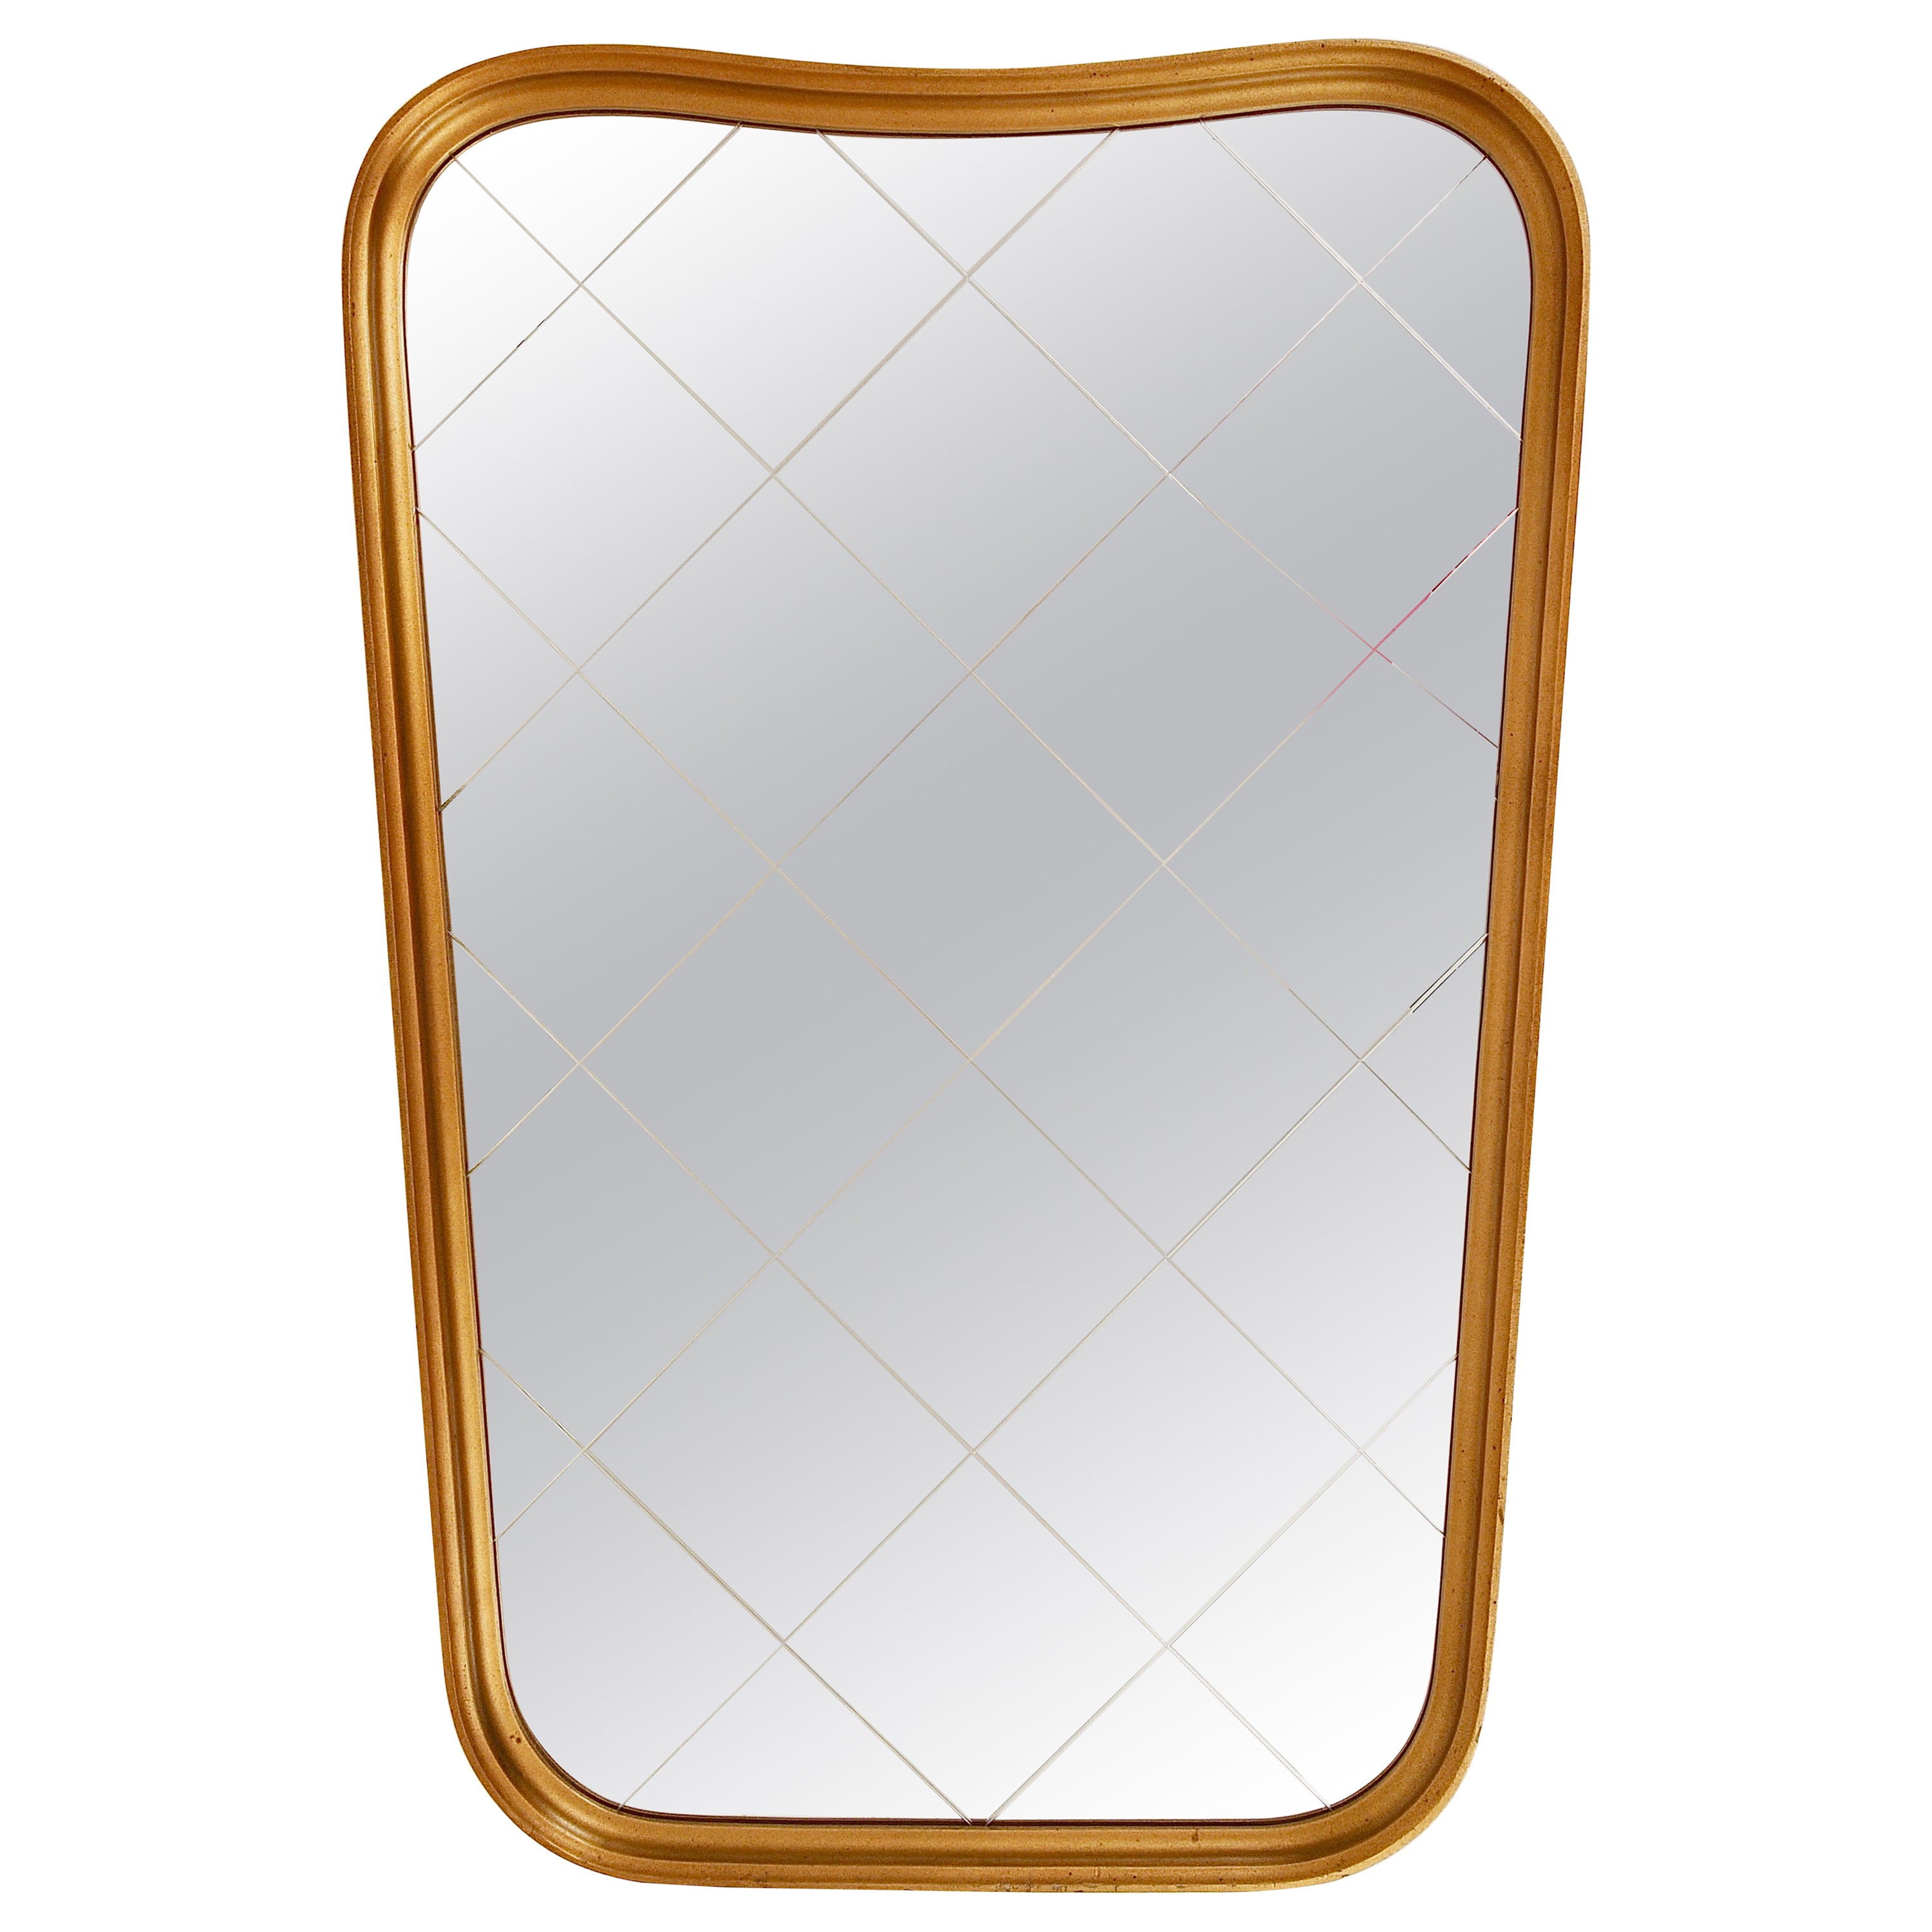 Large Mid-Century Golden Wall Mirror with Faceted Check Pattern, Austria, 1950s For Sale